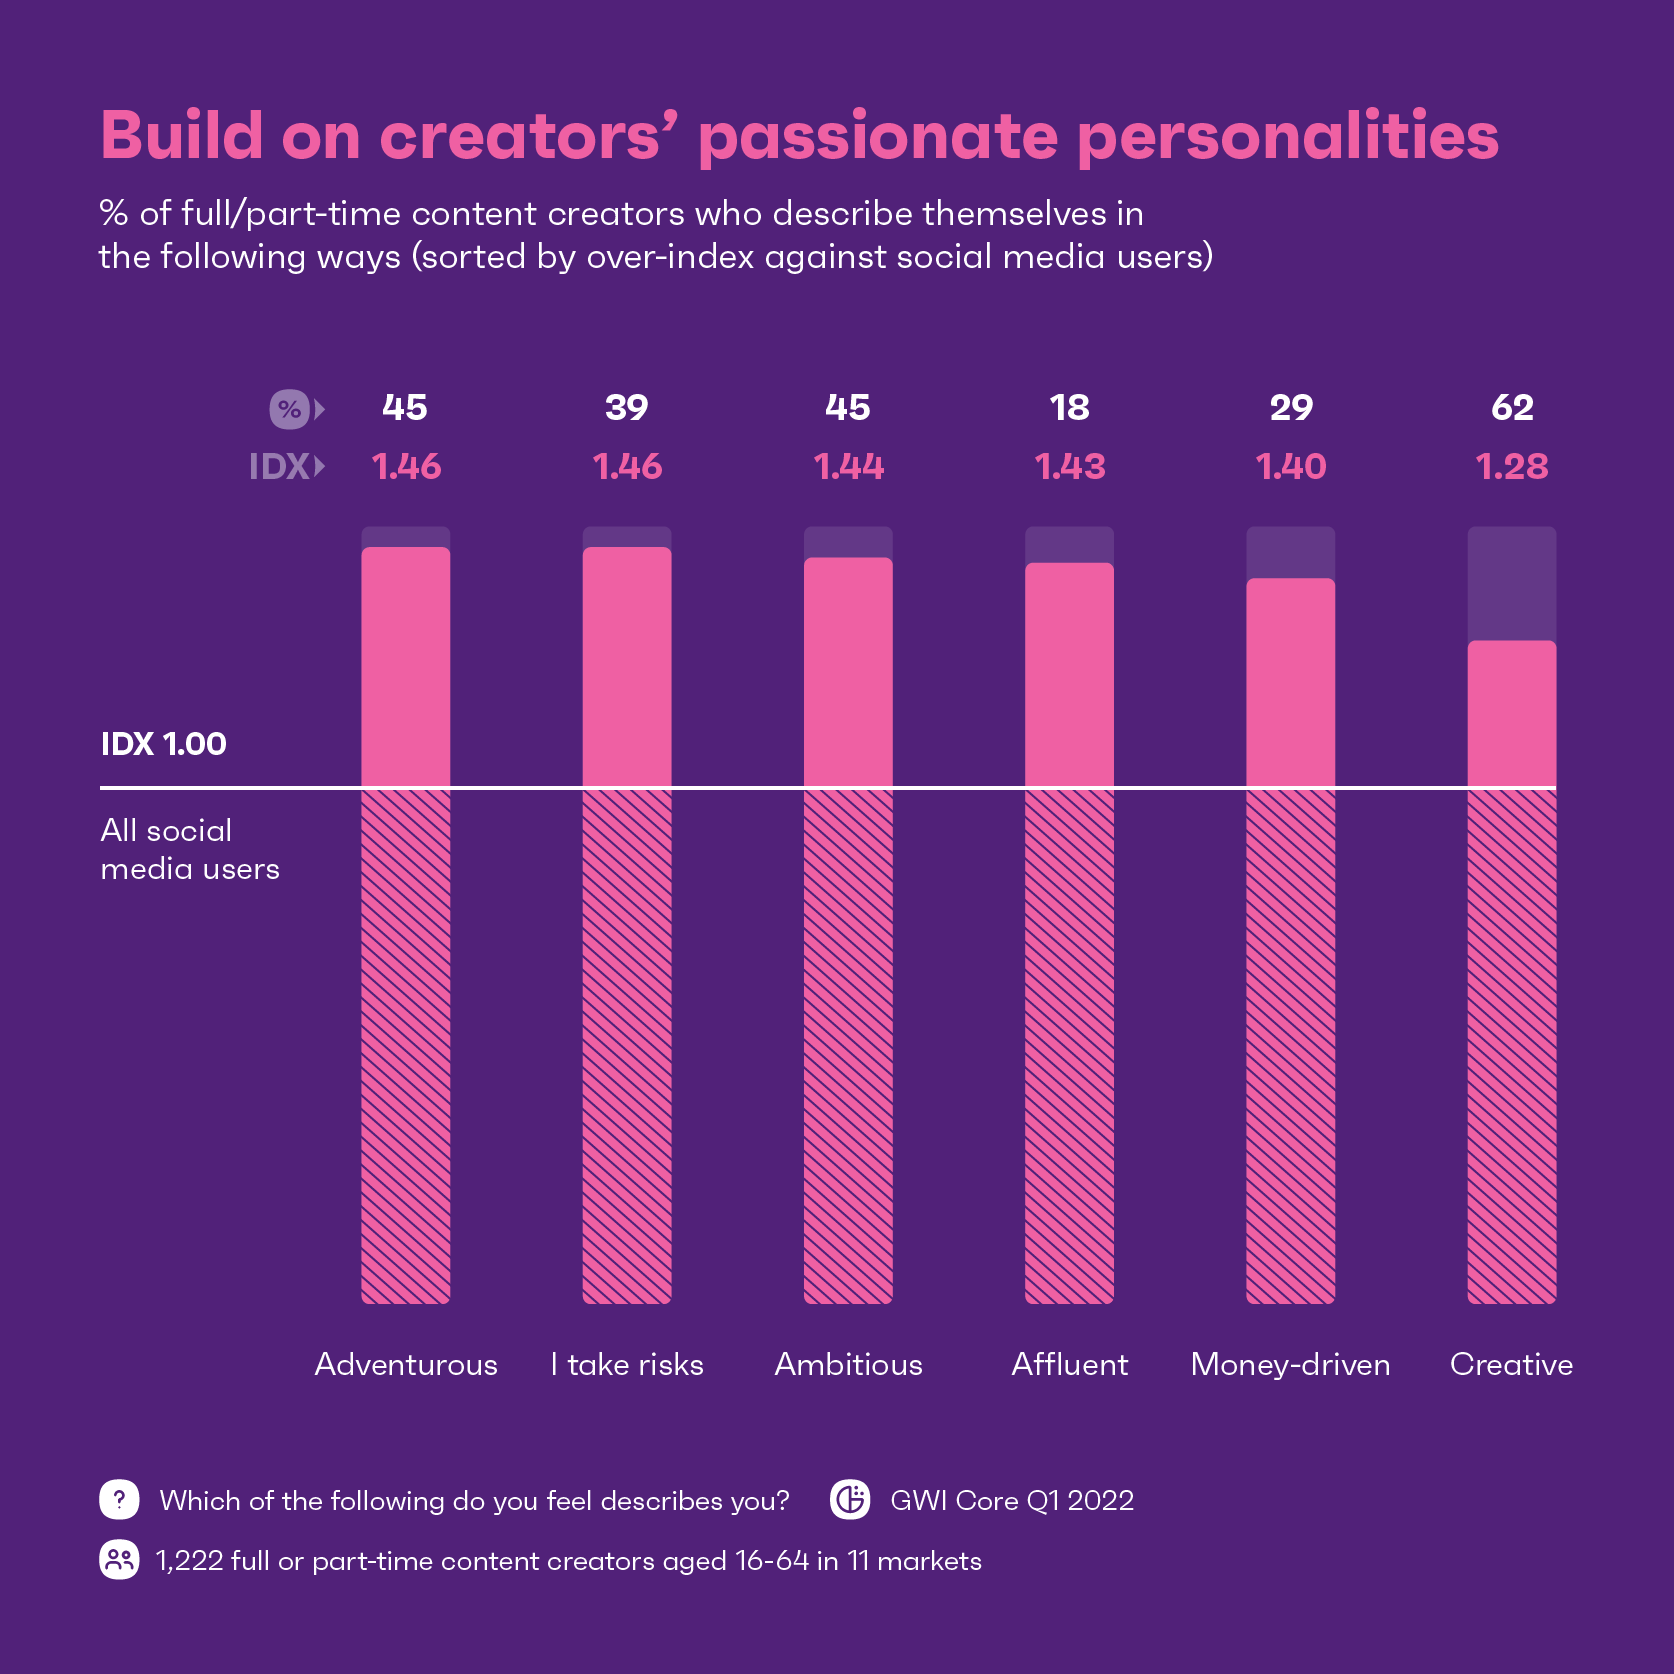 Chart showing how content creators describe themselves